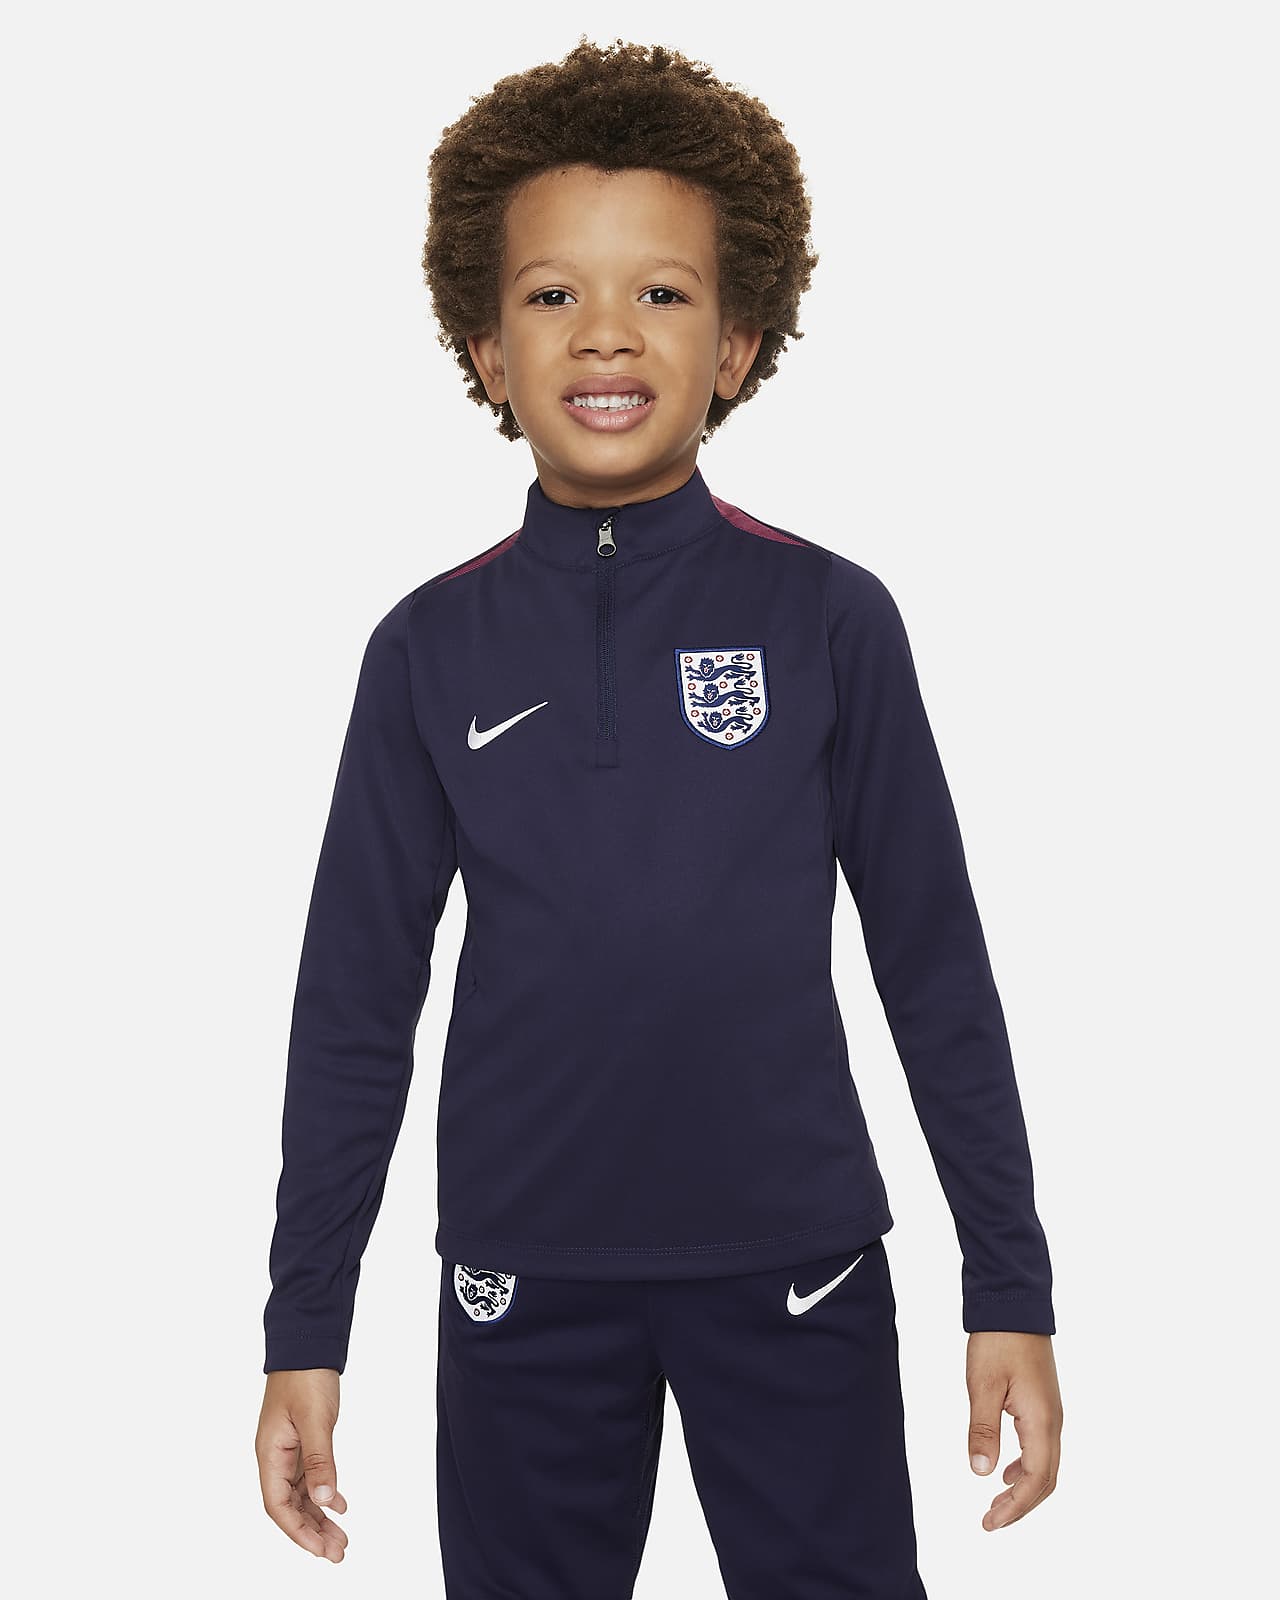 England Academy Pro Younger Kids' Nike Dri-FIT Football Drill Top